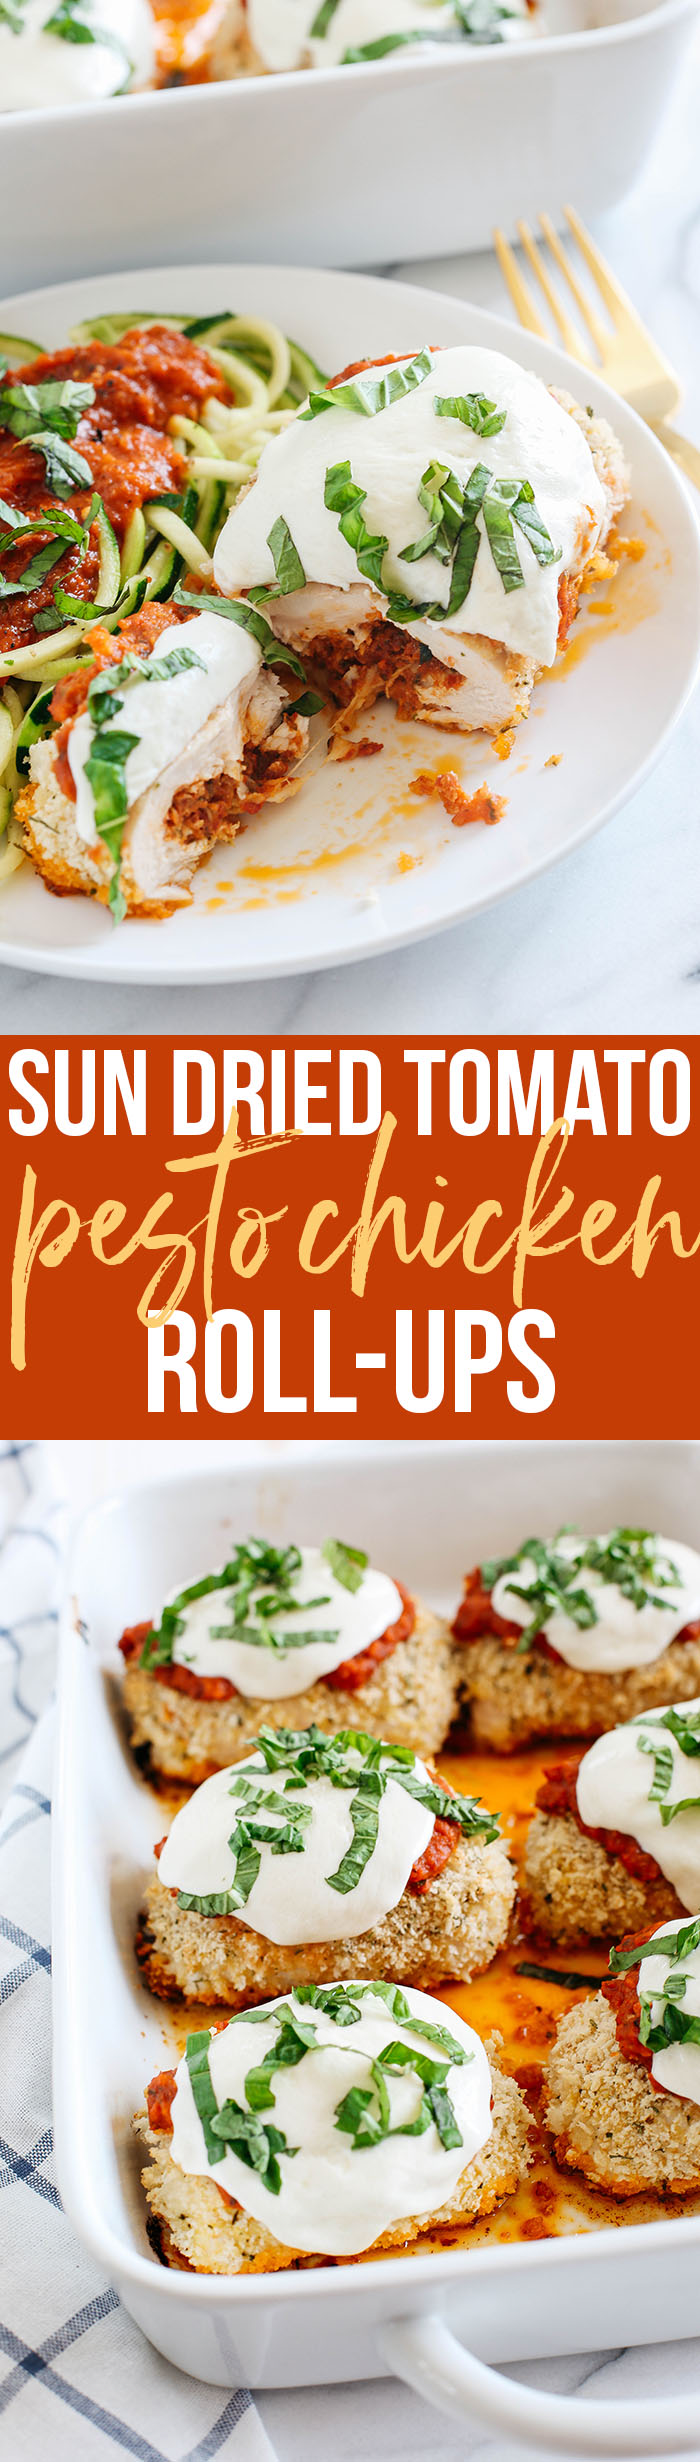 This recipe for Sun Dried Tomato Pesto Chicken Rolls makes the perfect weeknight comfort meal that is cheesy and delicious with even tastier leftovers!  Serve with zucchini noodles for a complete meal!